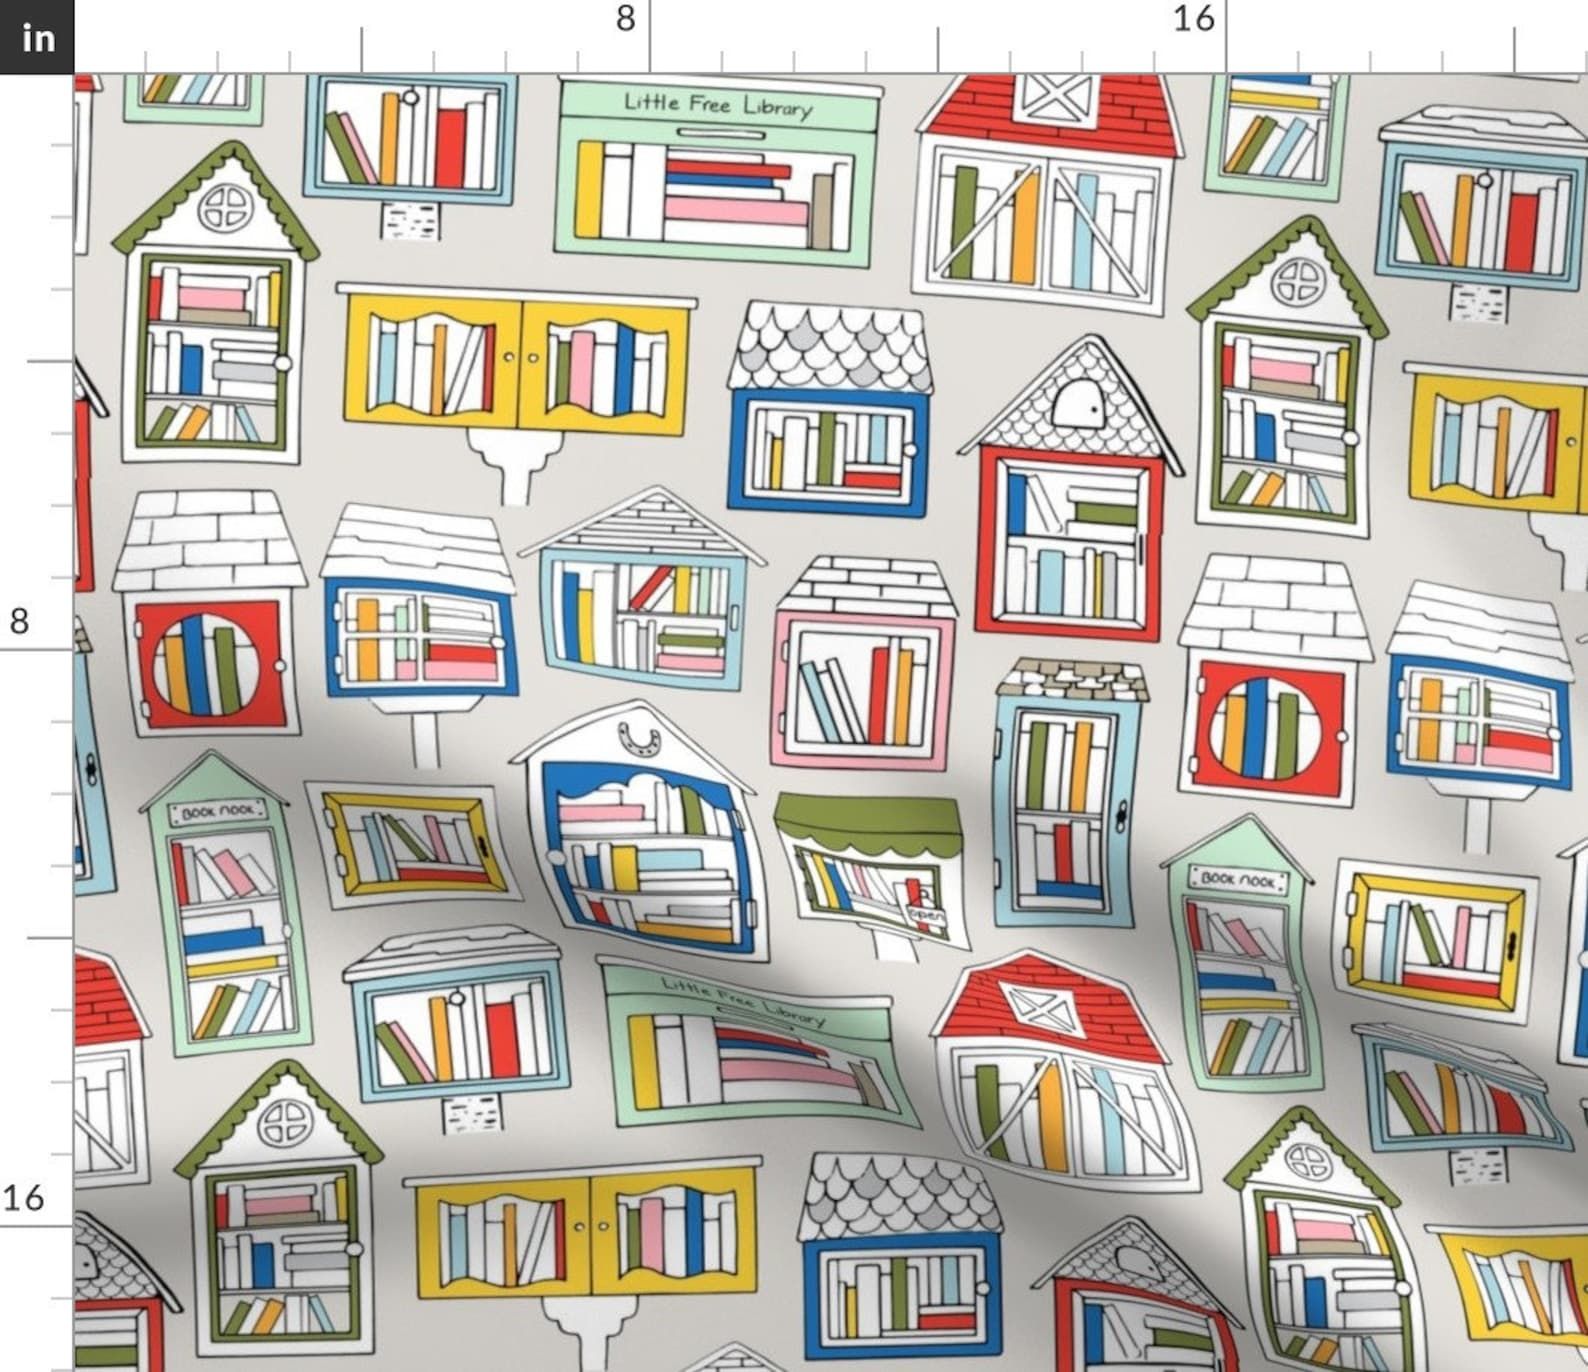 cool grey fabric with illustrations of various LFLs in bright primary colors.